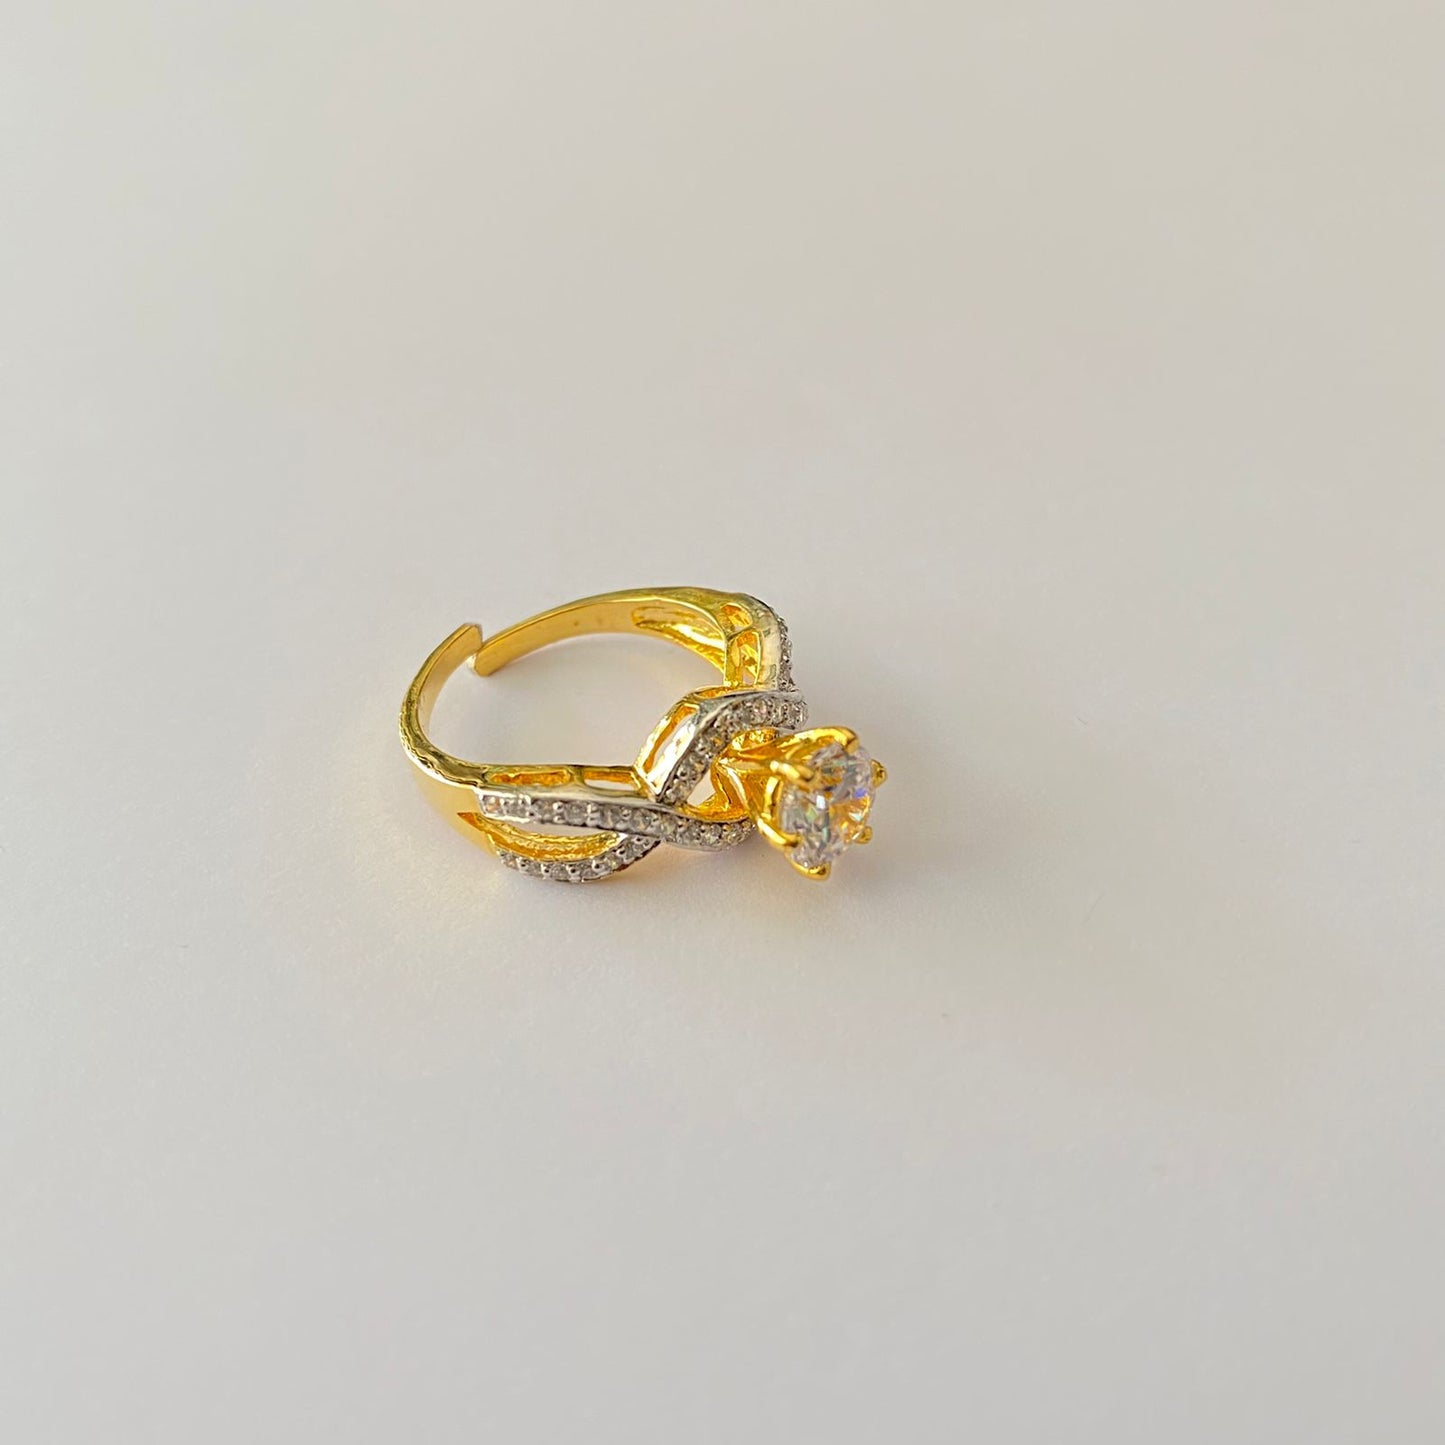 Pure Silver 92.5 Gold Plated Diamond Ring